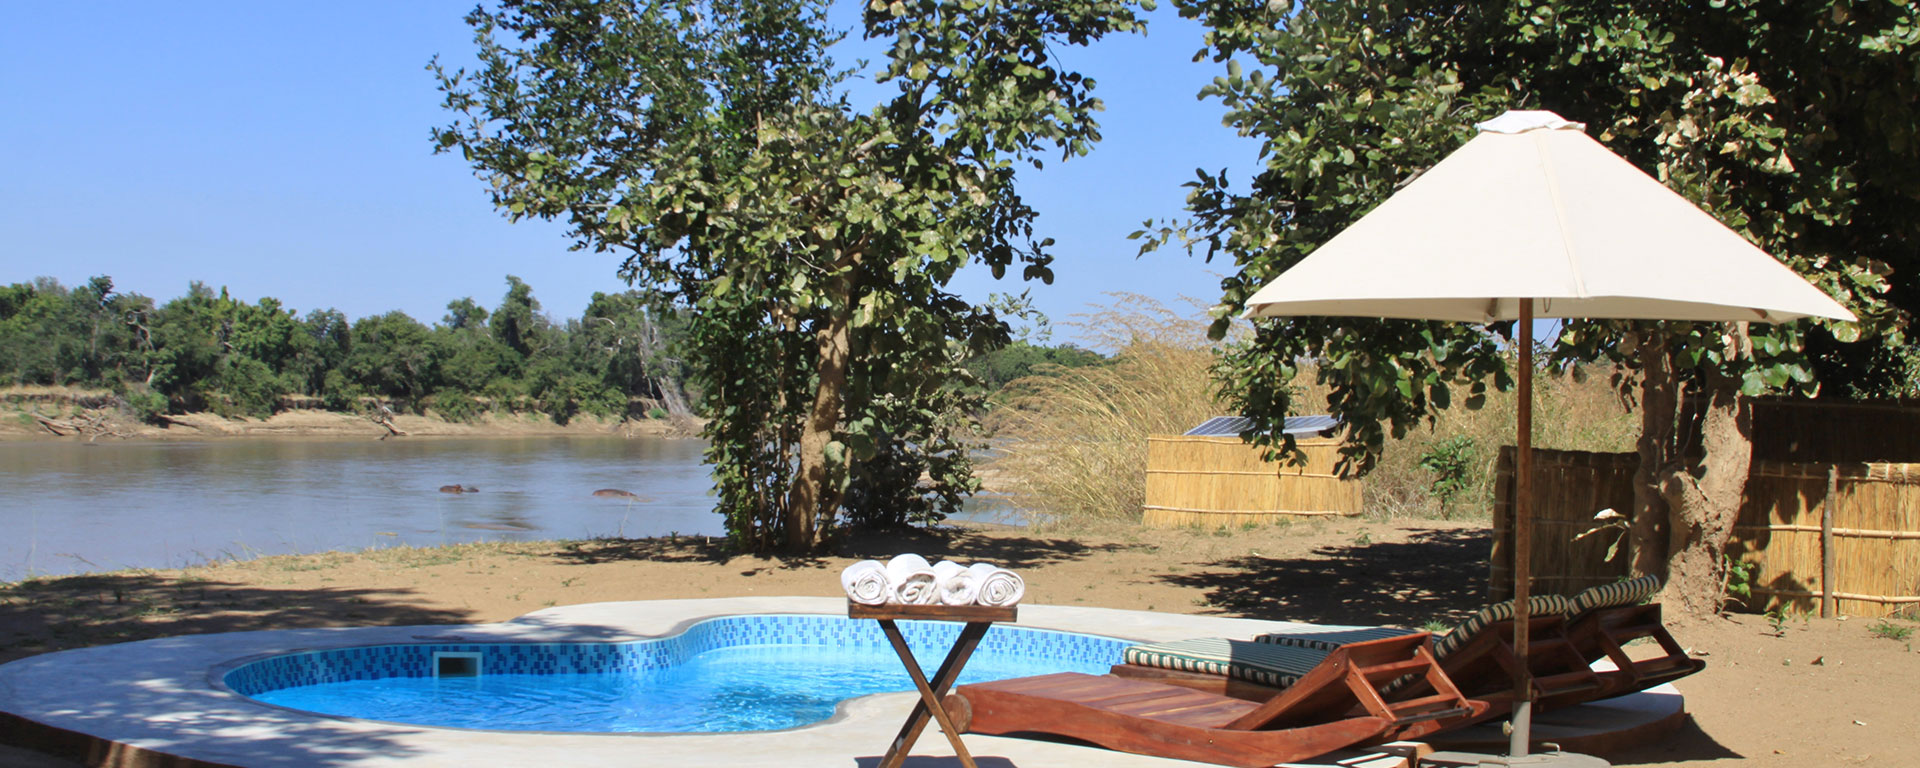 top-7-things-to-see-and-do-in-south-luangwa-mchenja